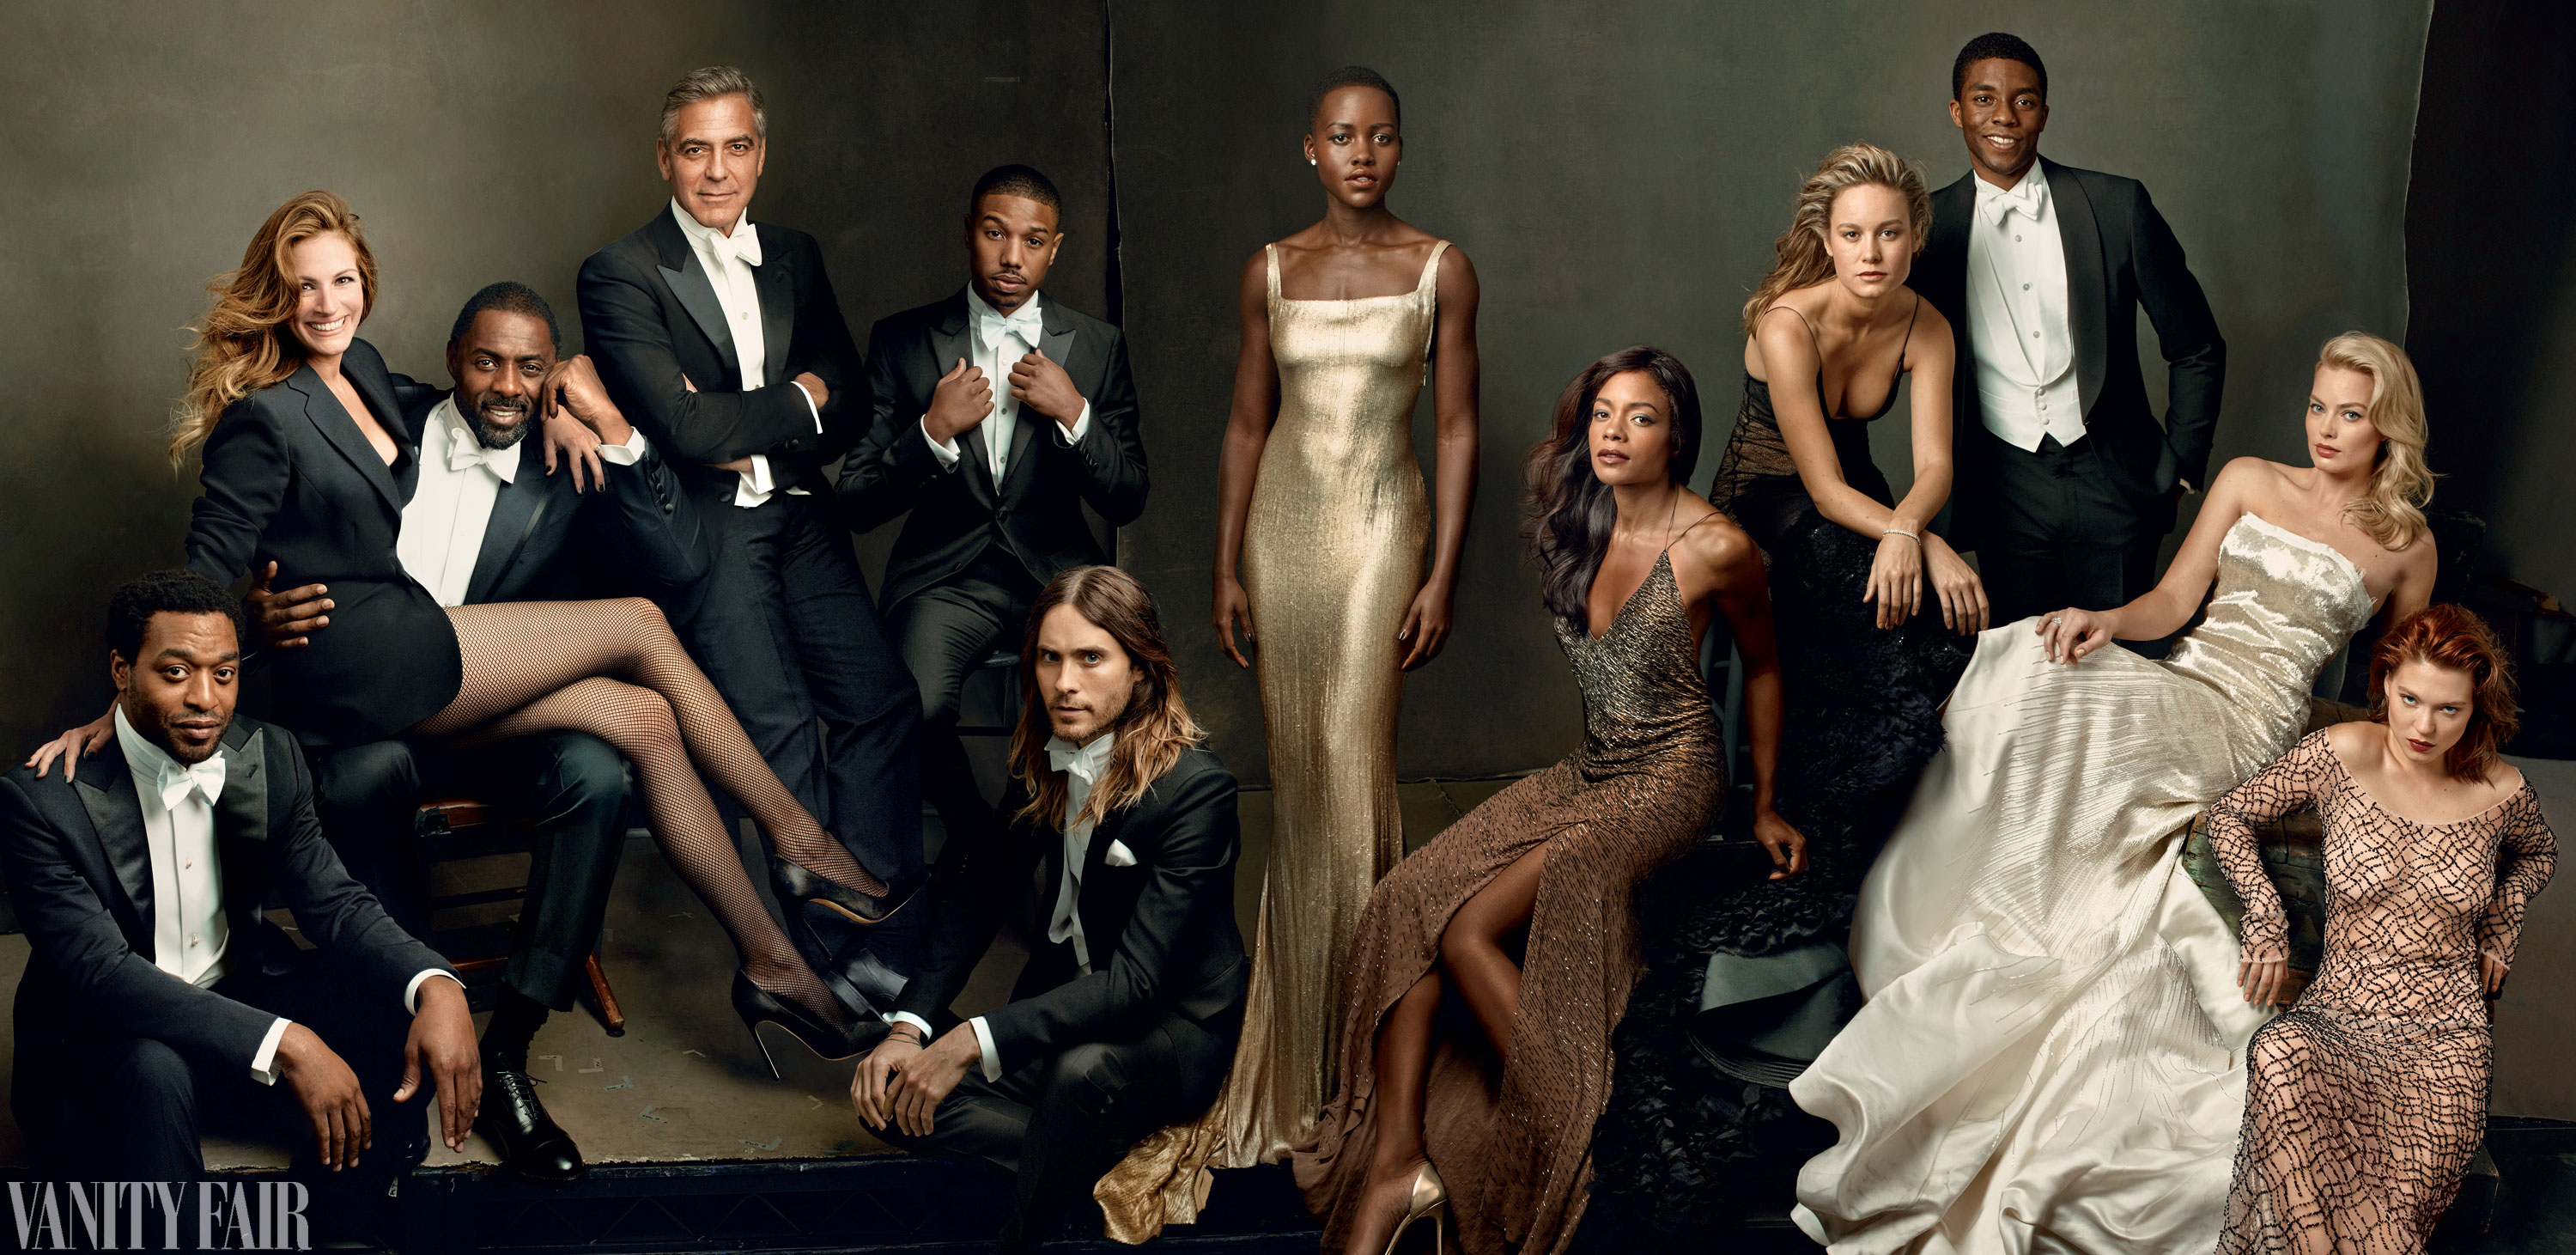 Vanity Fair' Hollywood Issue features Emma Stone, Ben Affleck